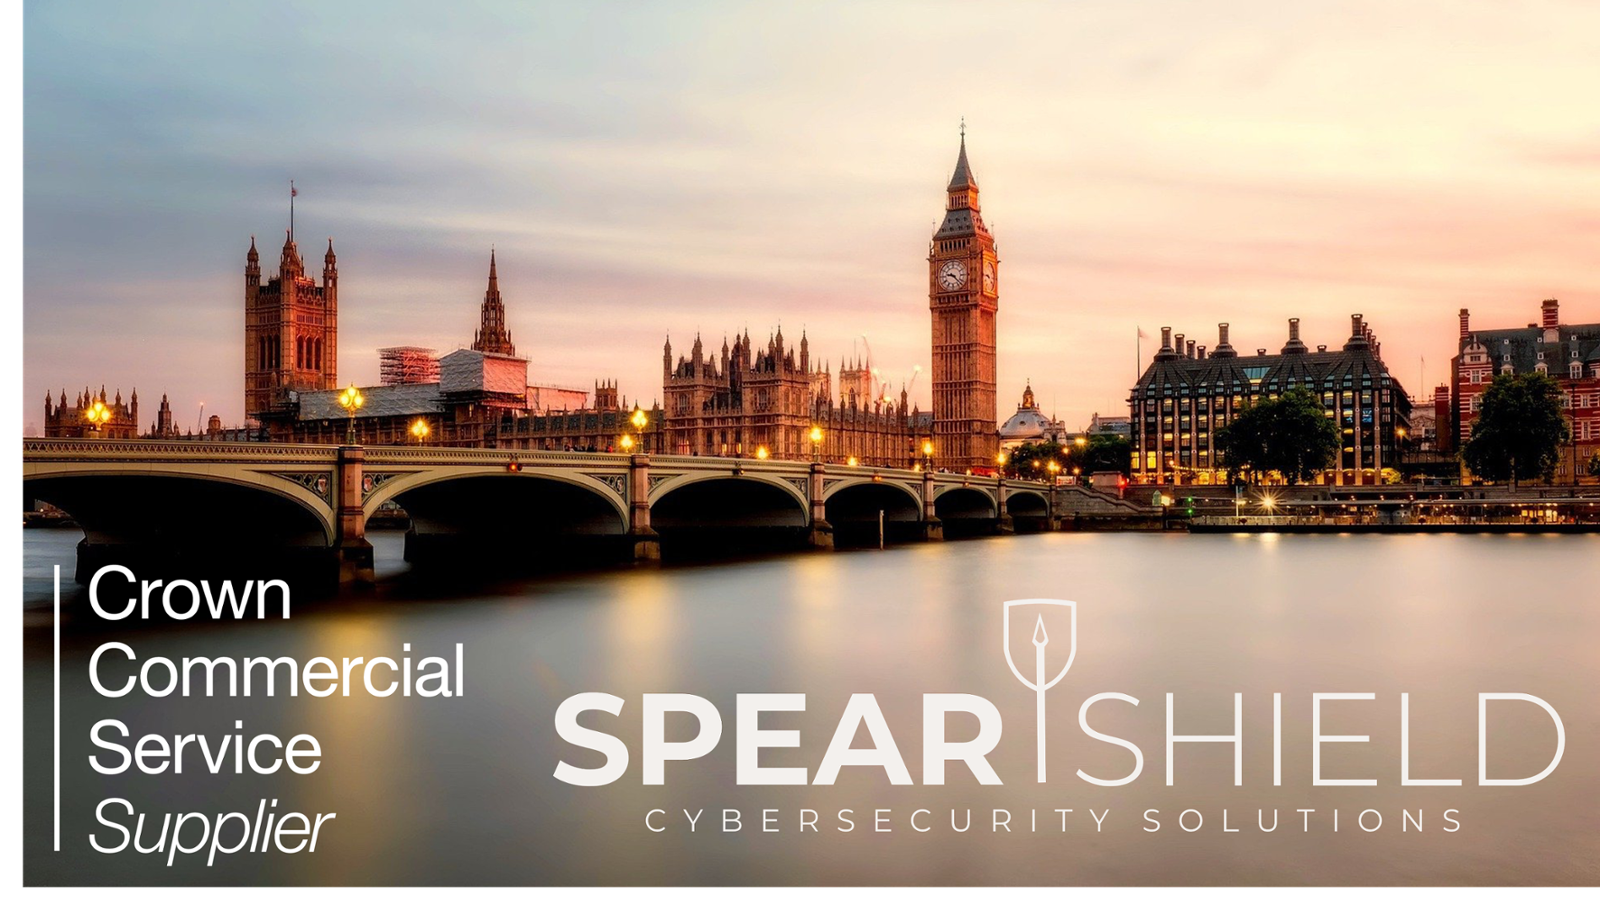 Spear Shield named as supplier to help secure the UK Public Sector